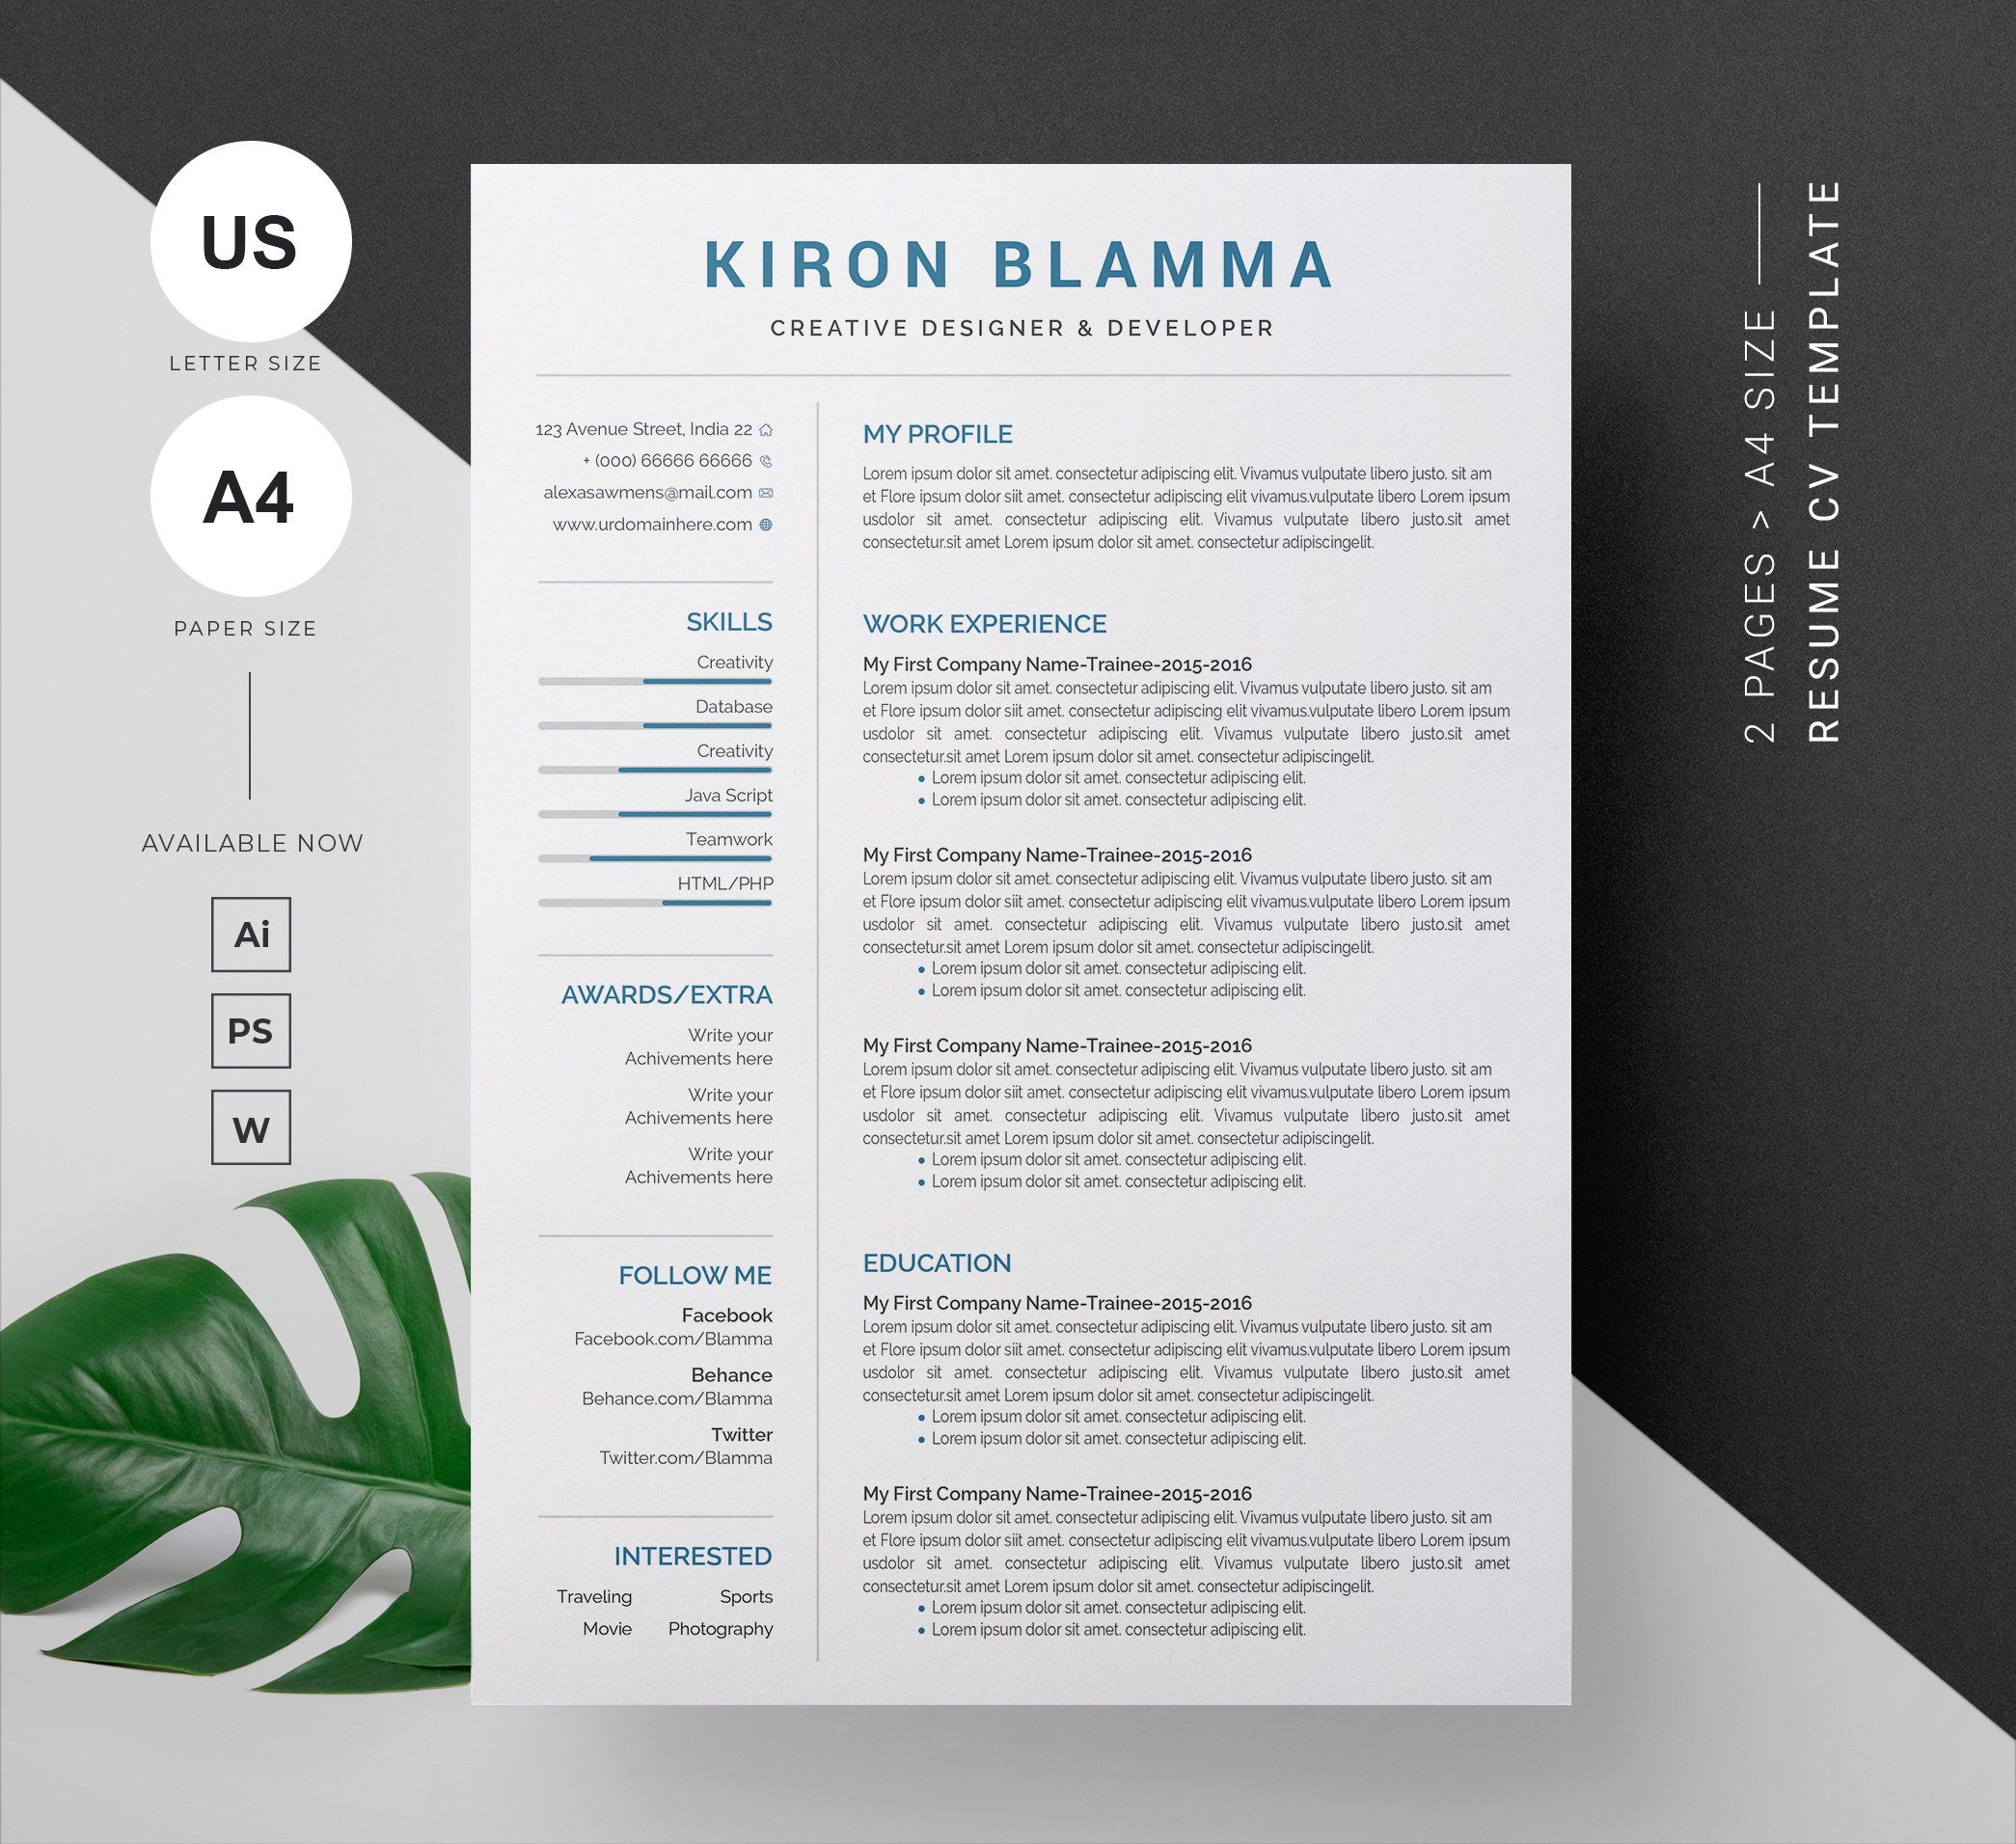 Resume Template & Business Card cover image.